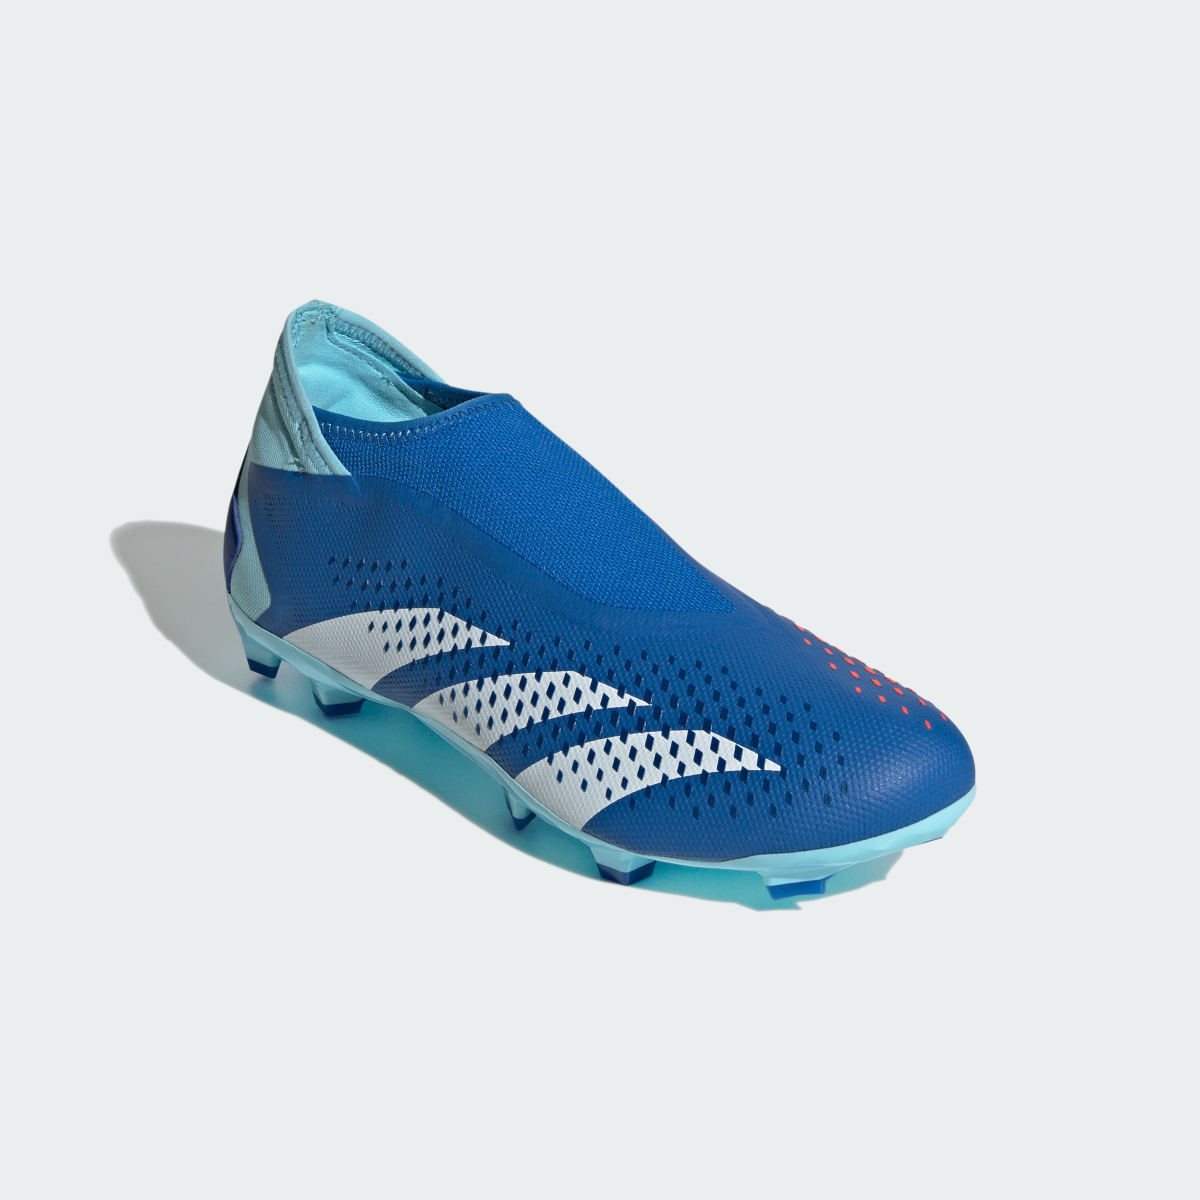 Adidas Predator Accuracy.3 Laceless Firm Ground Soccer Cleats. 5